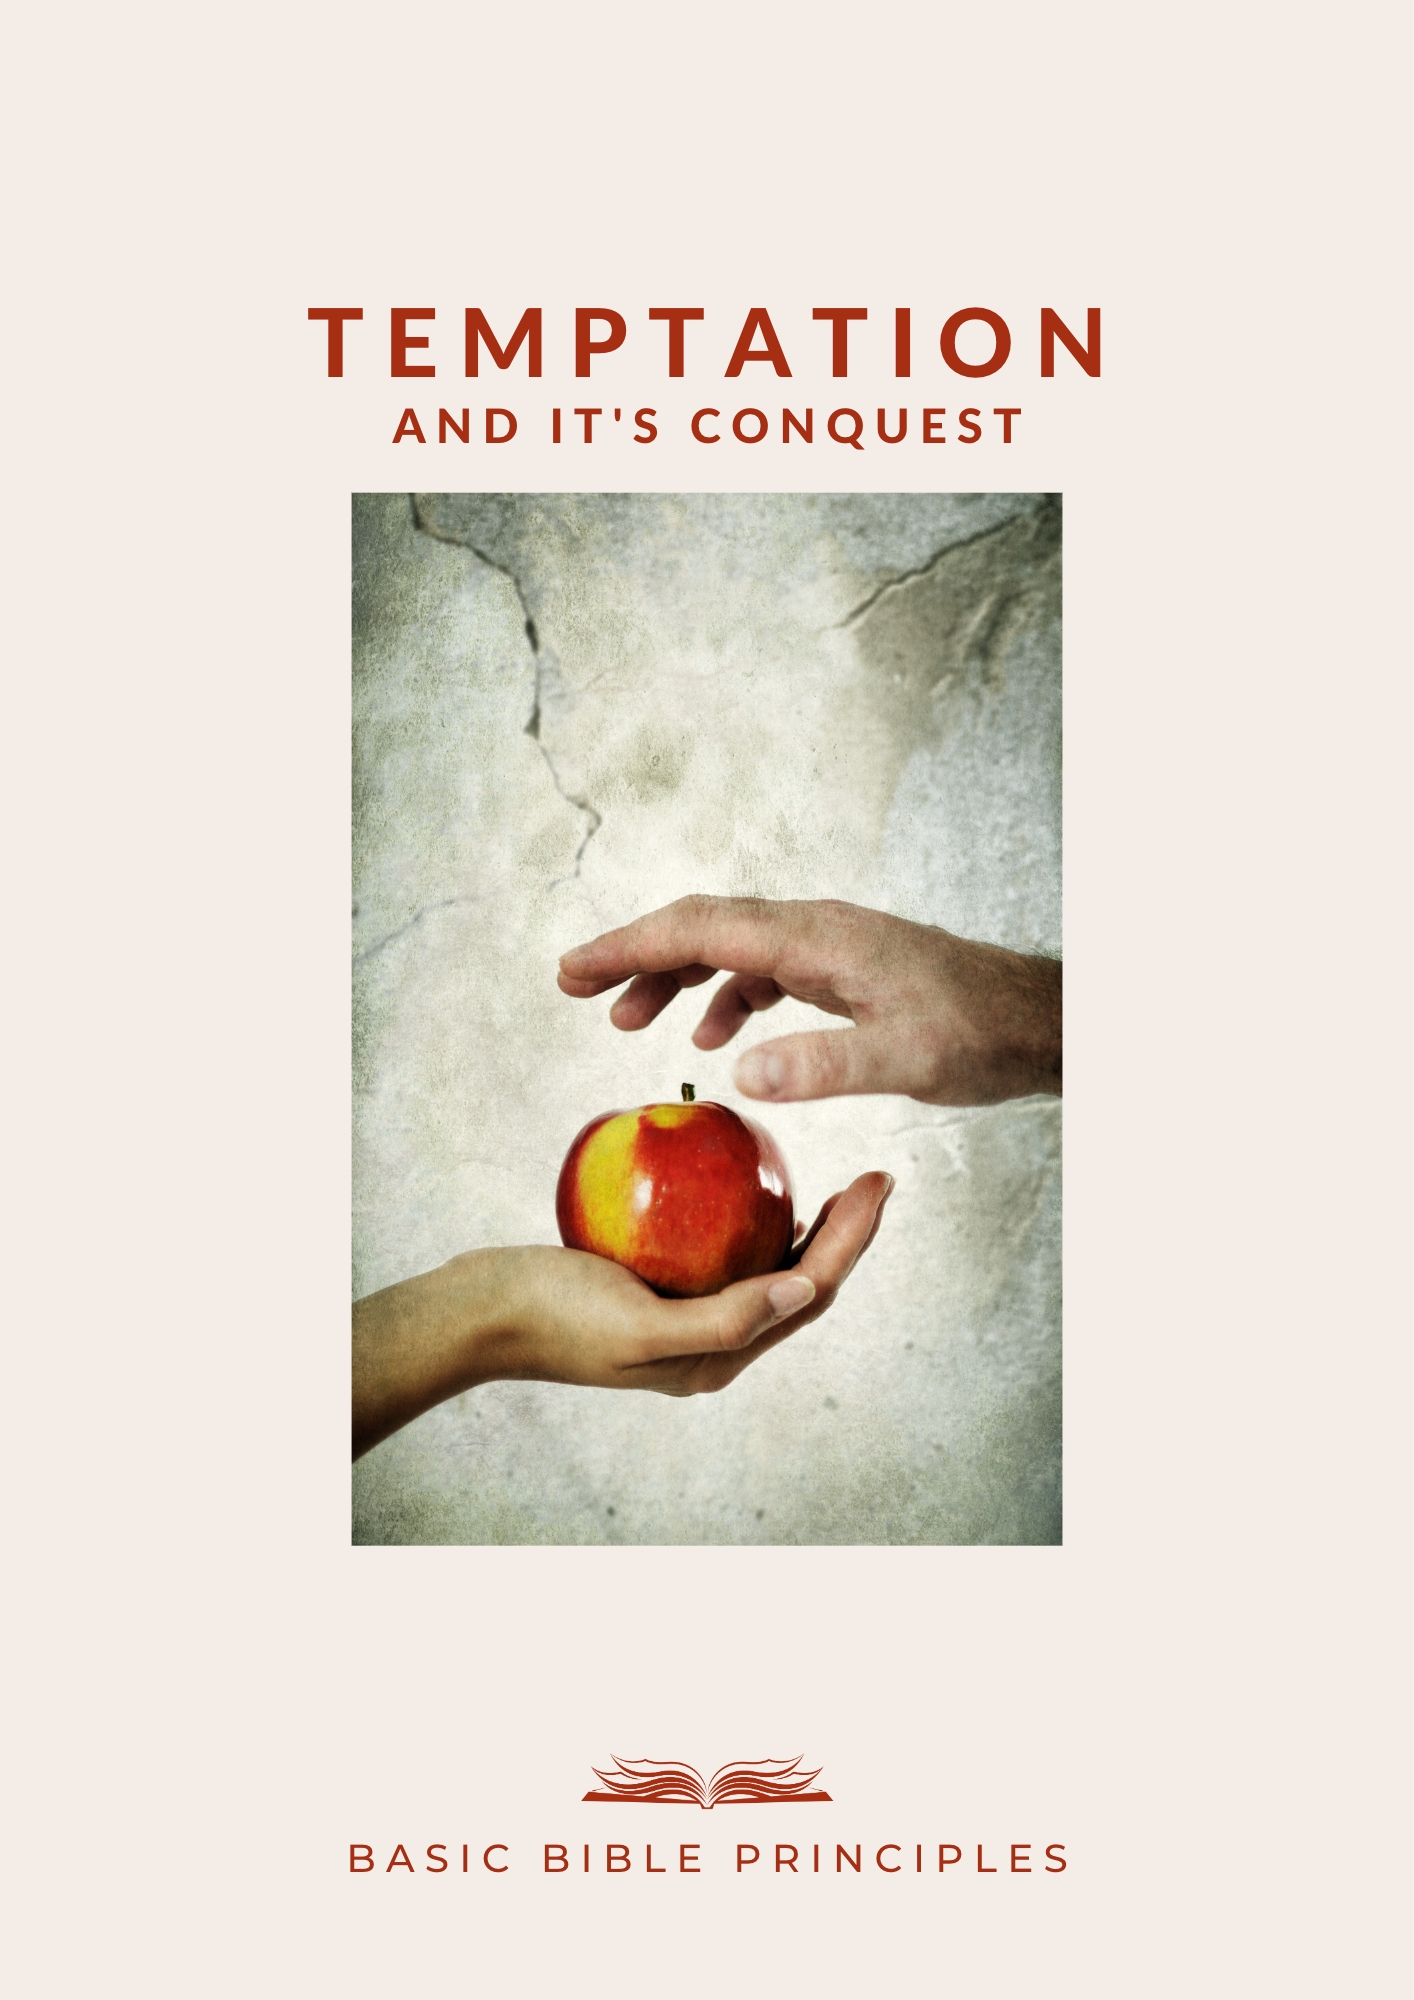 Basic Bible Principles: TEMPTATION AND ITS CONQUEST